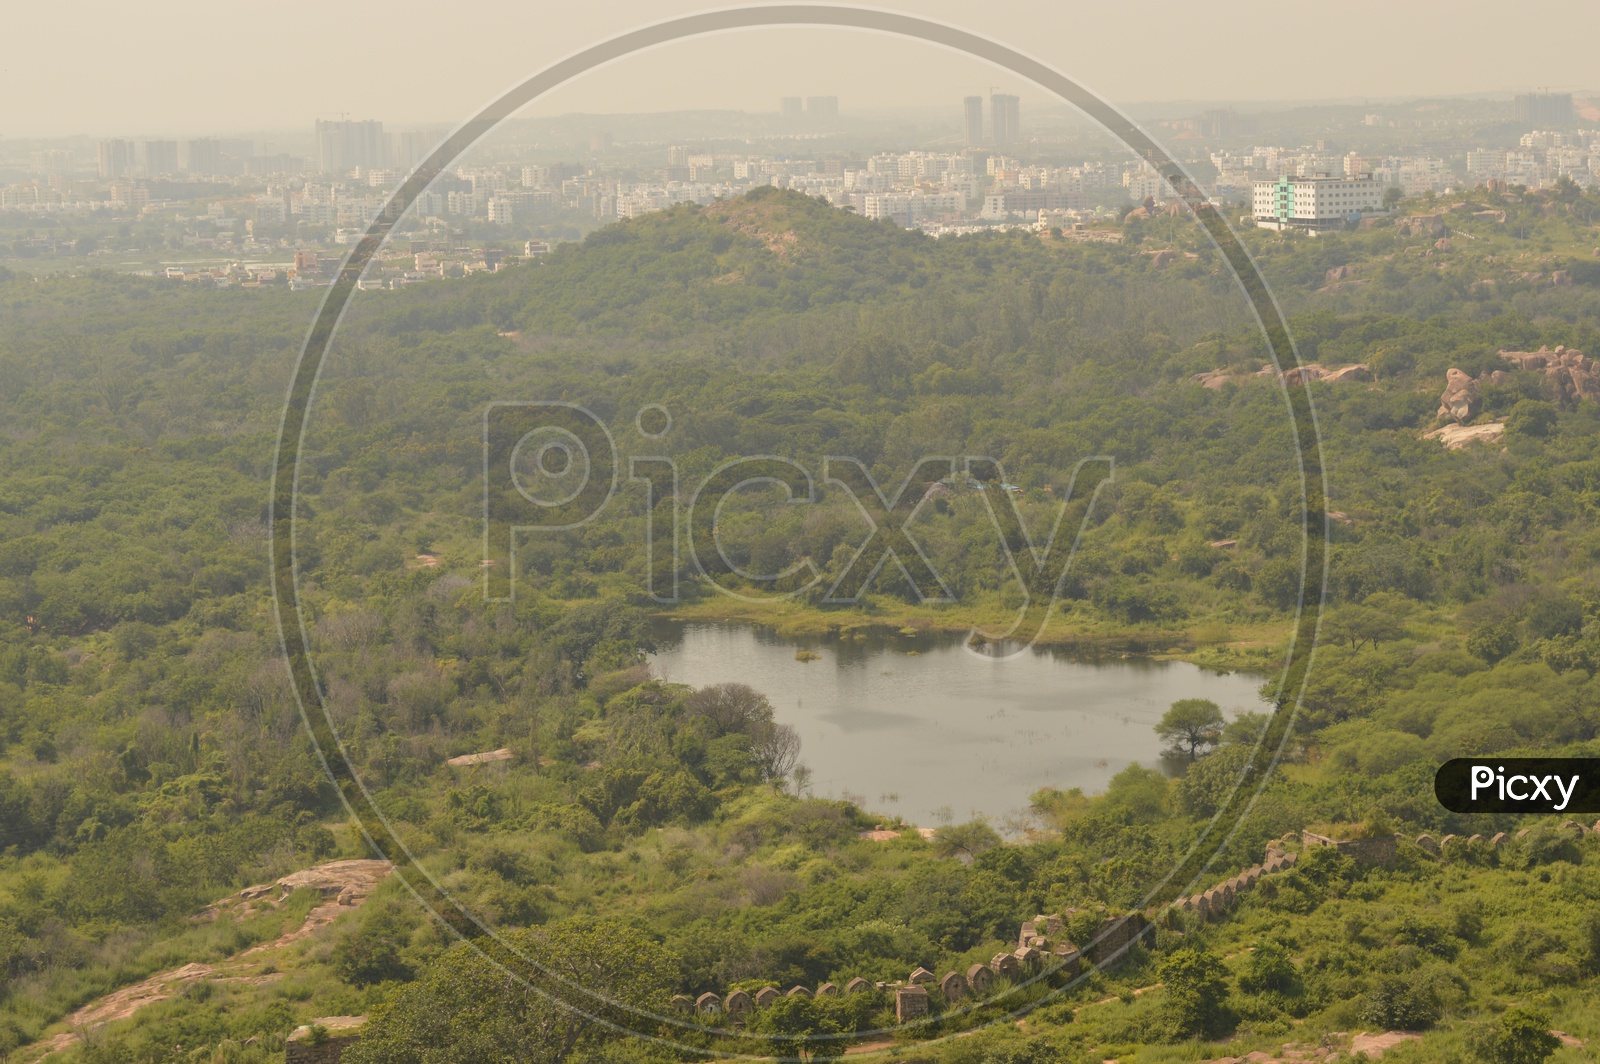 A view of the pond and surrounding trees from Golconda